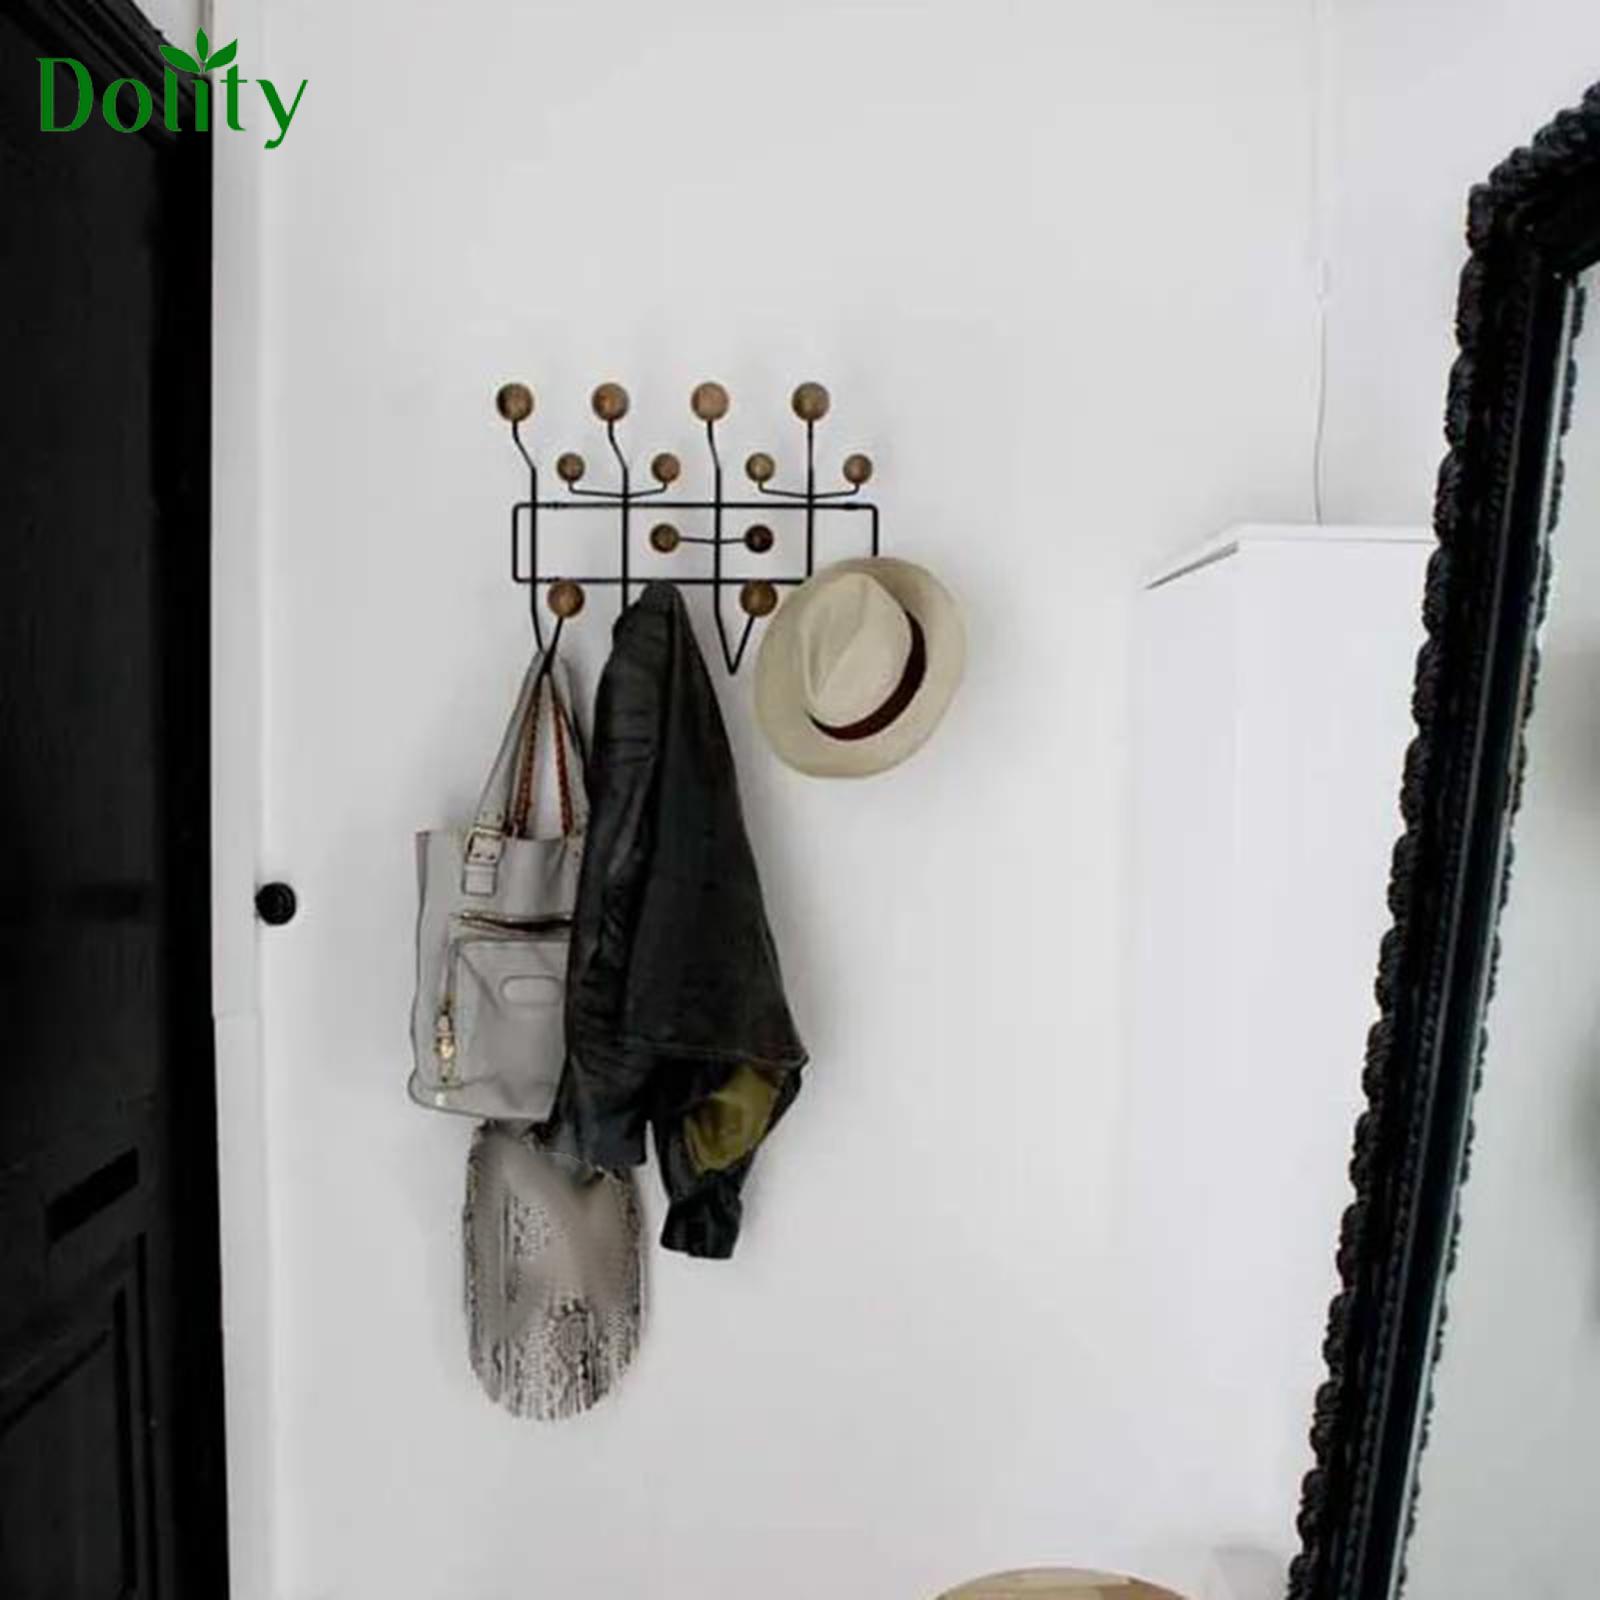 Dolity Wall Mounted Coat Rack Space Saving Organizer for Porch Living Room